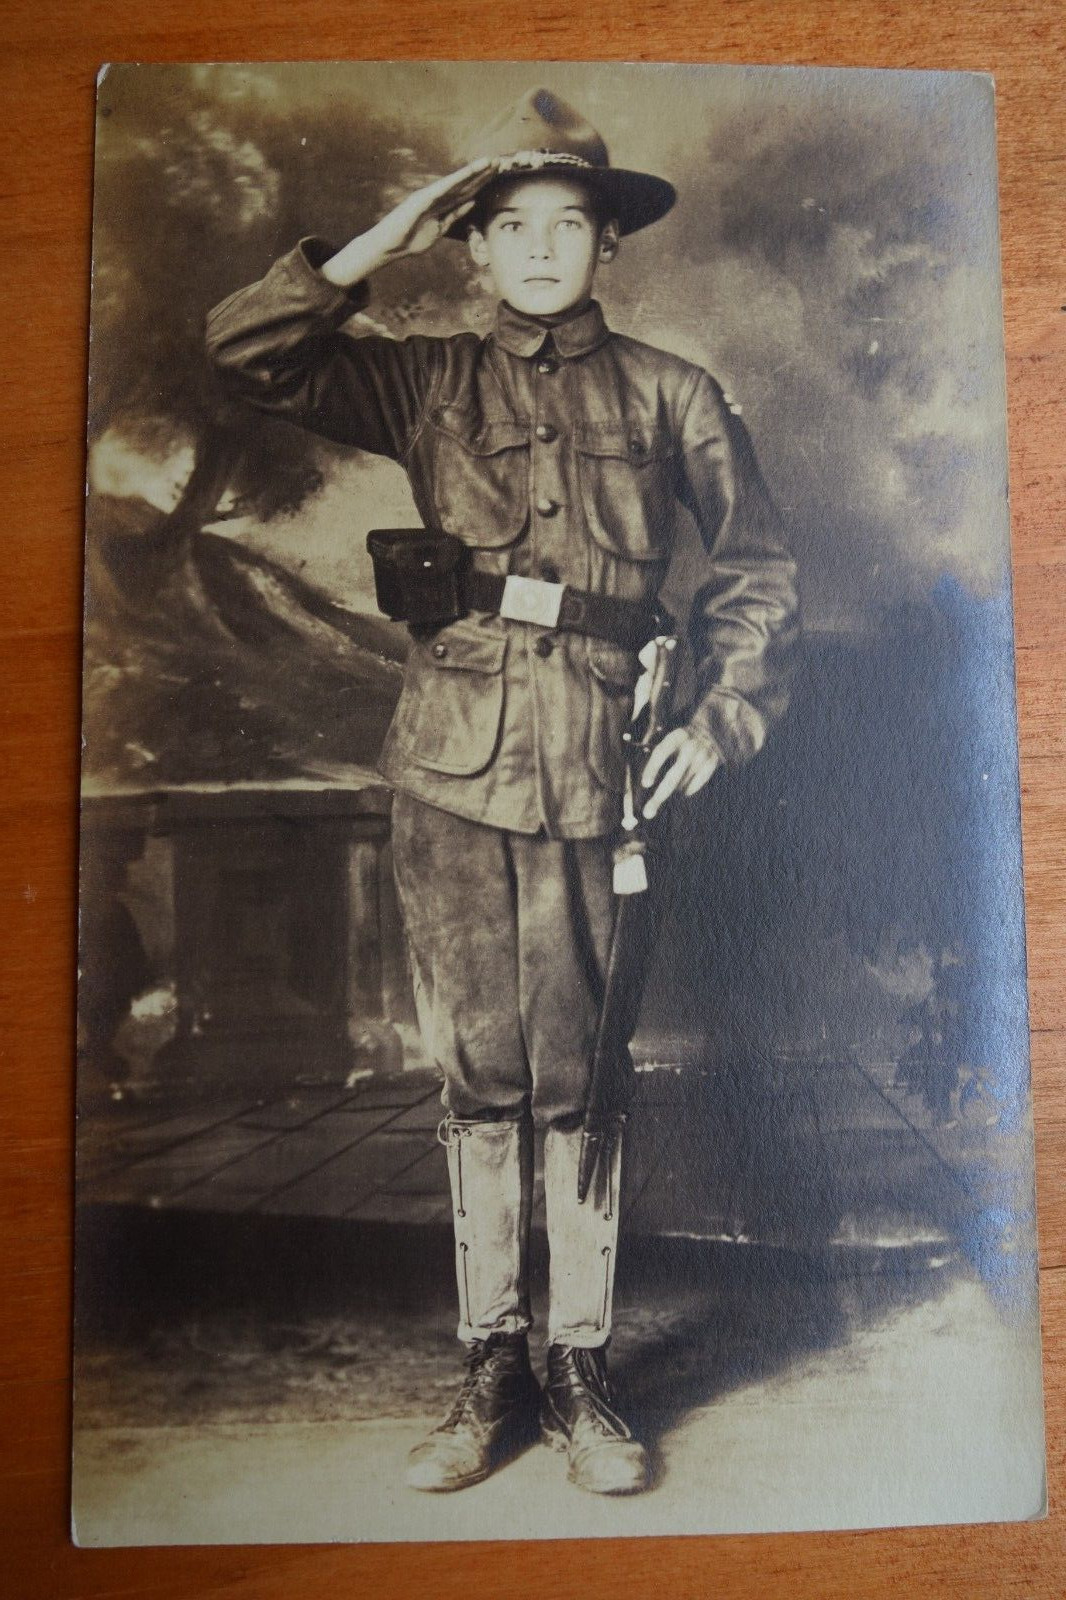 saluting young scout or trooper, in uniform real photo postcard studio rppc